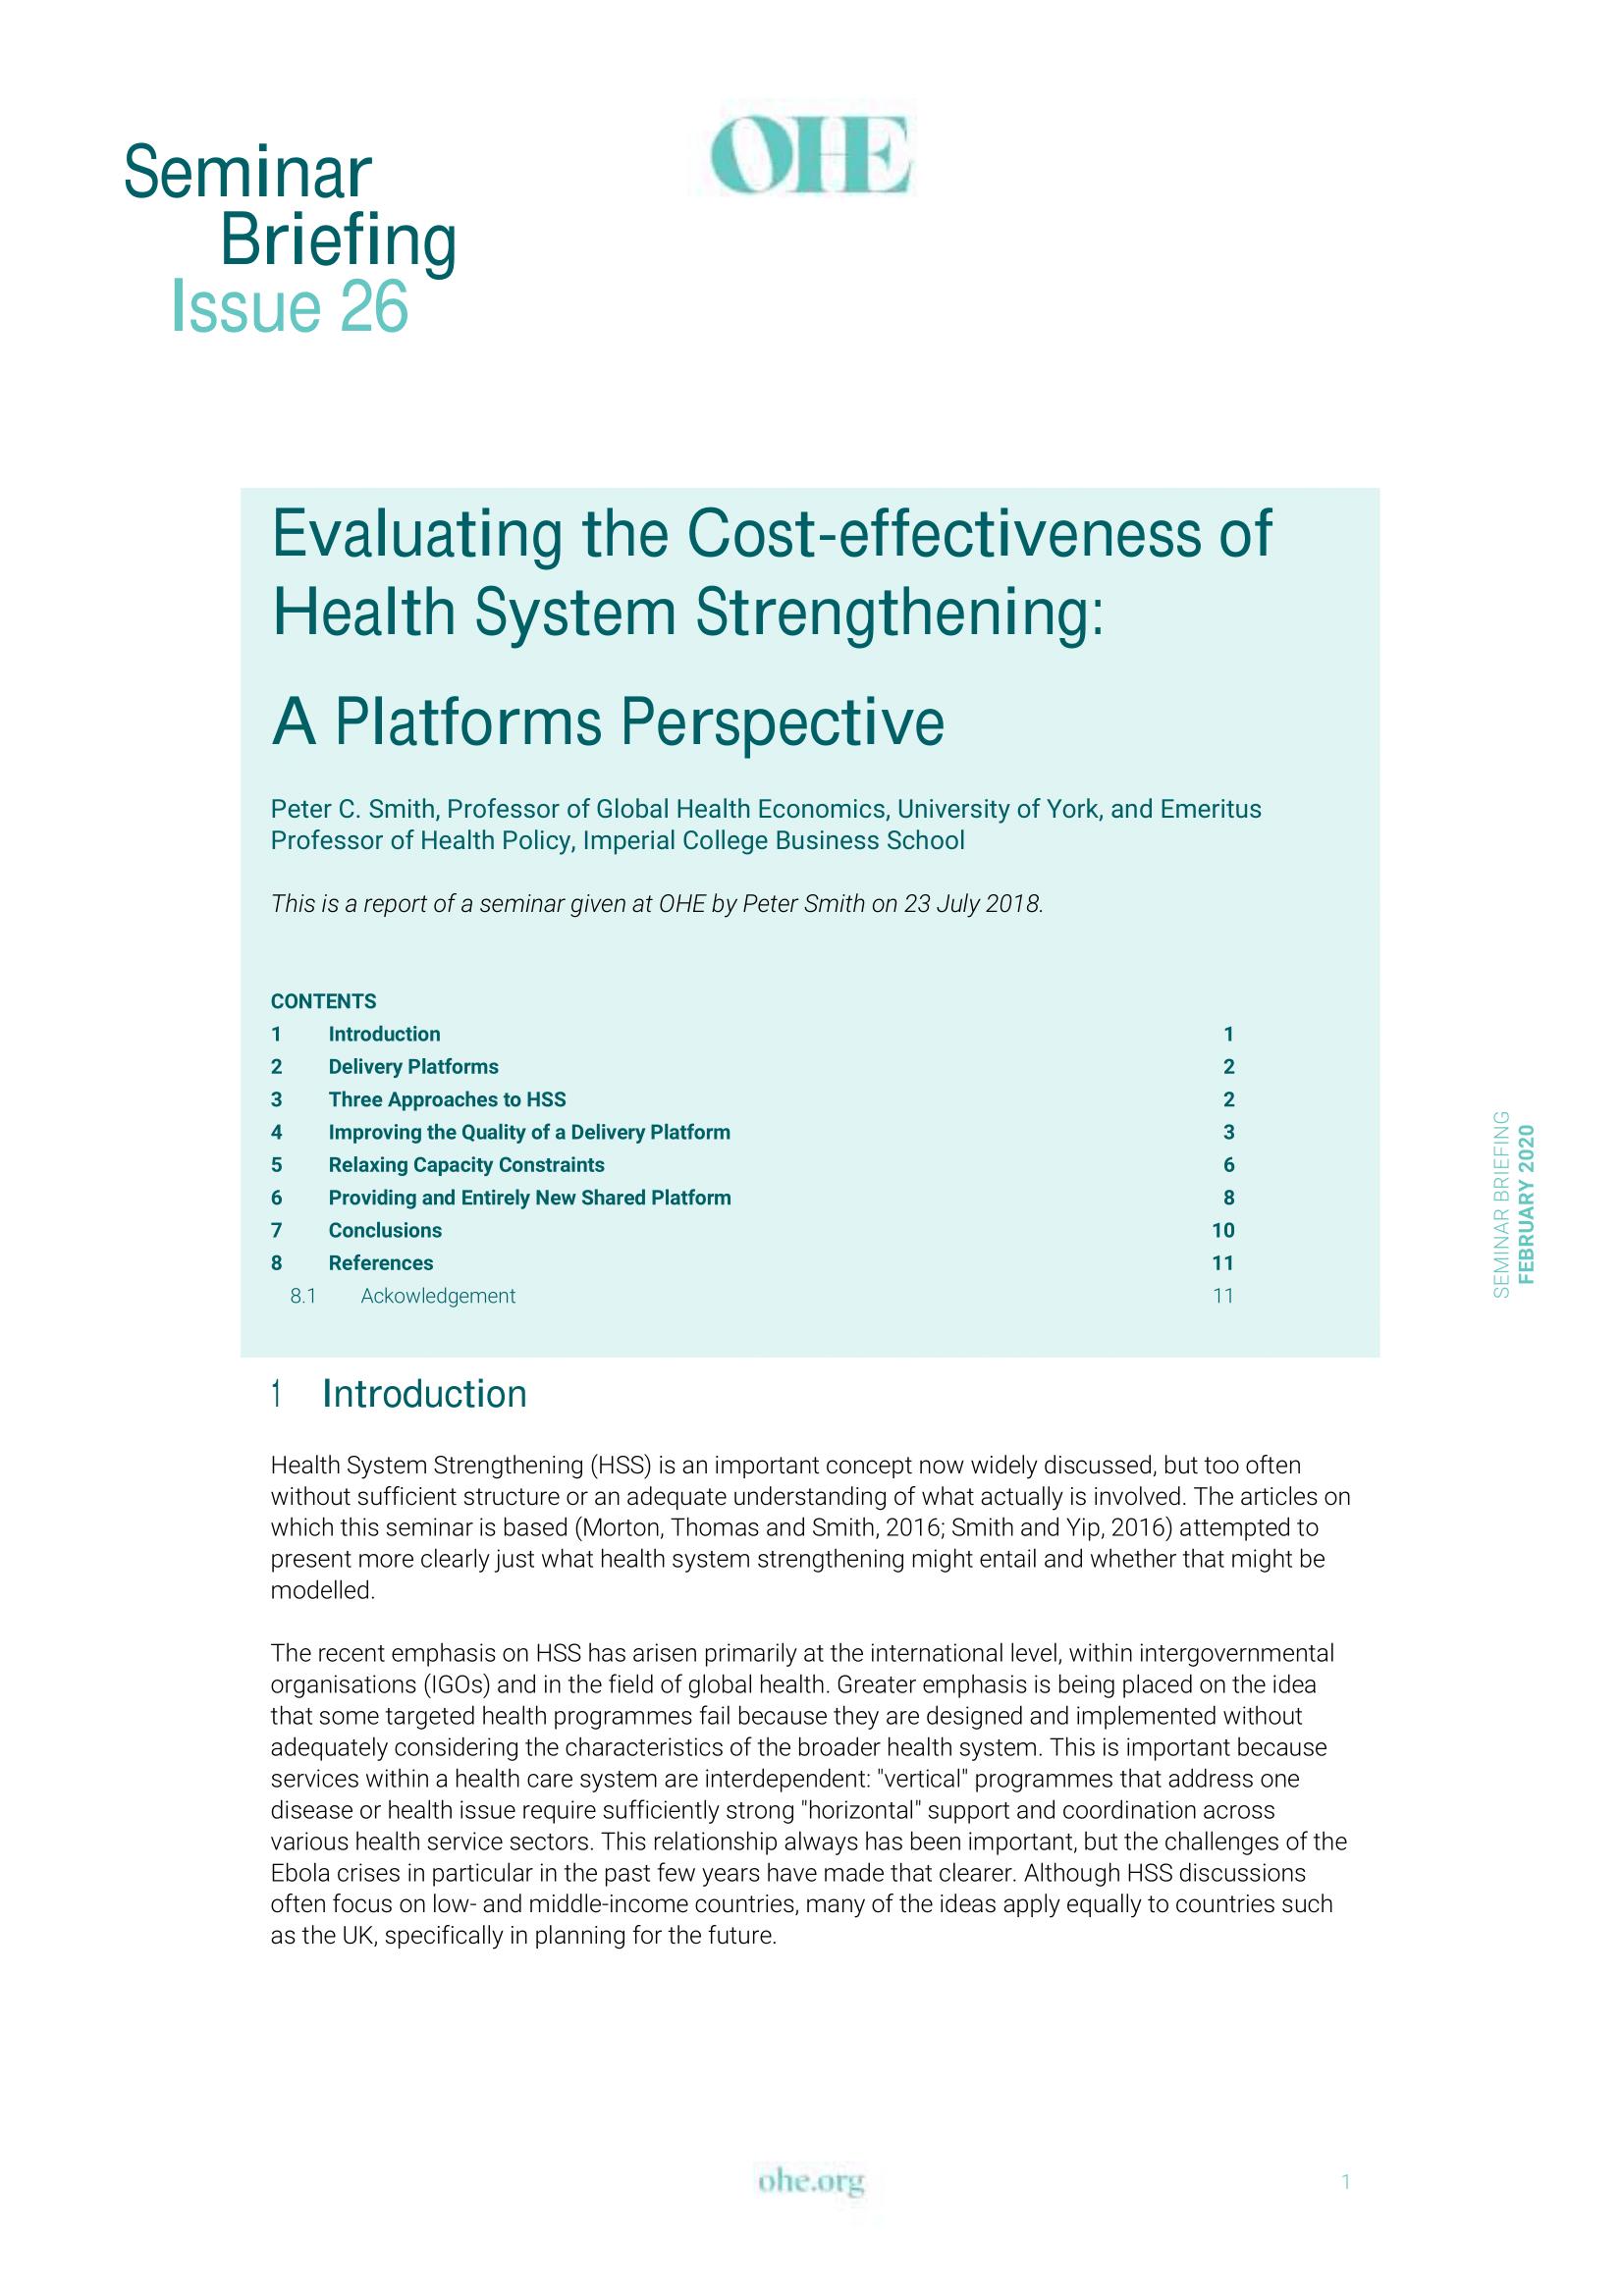 Evaluating the Cost-effectiveness of Health System Strengthening: A Platforms Perspective